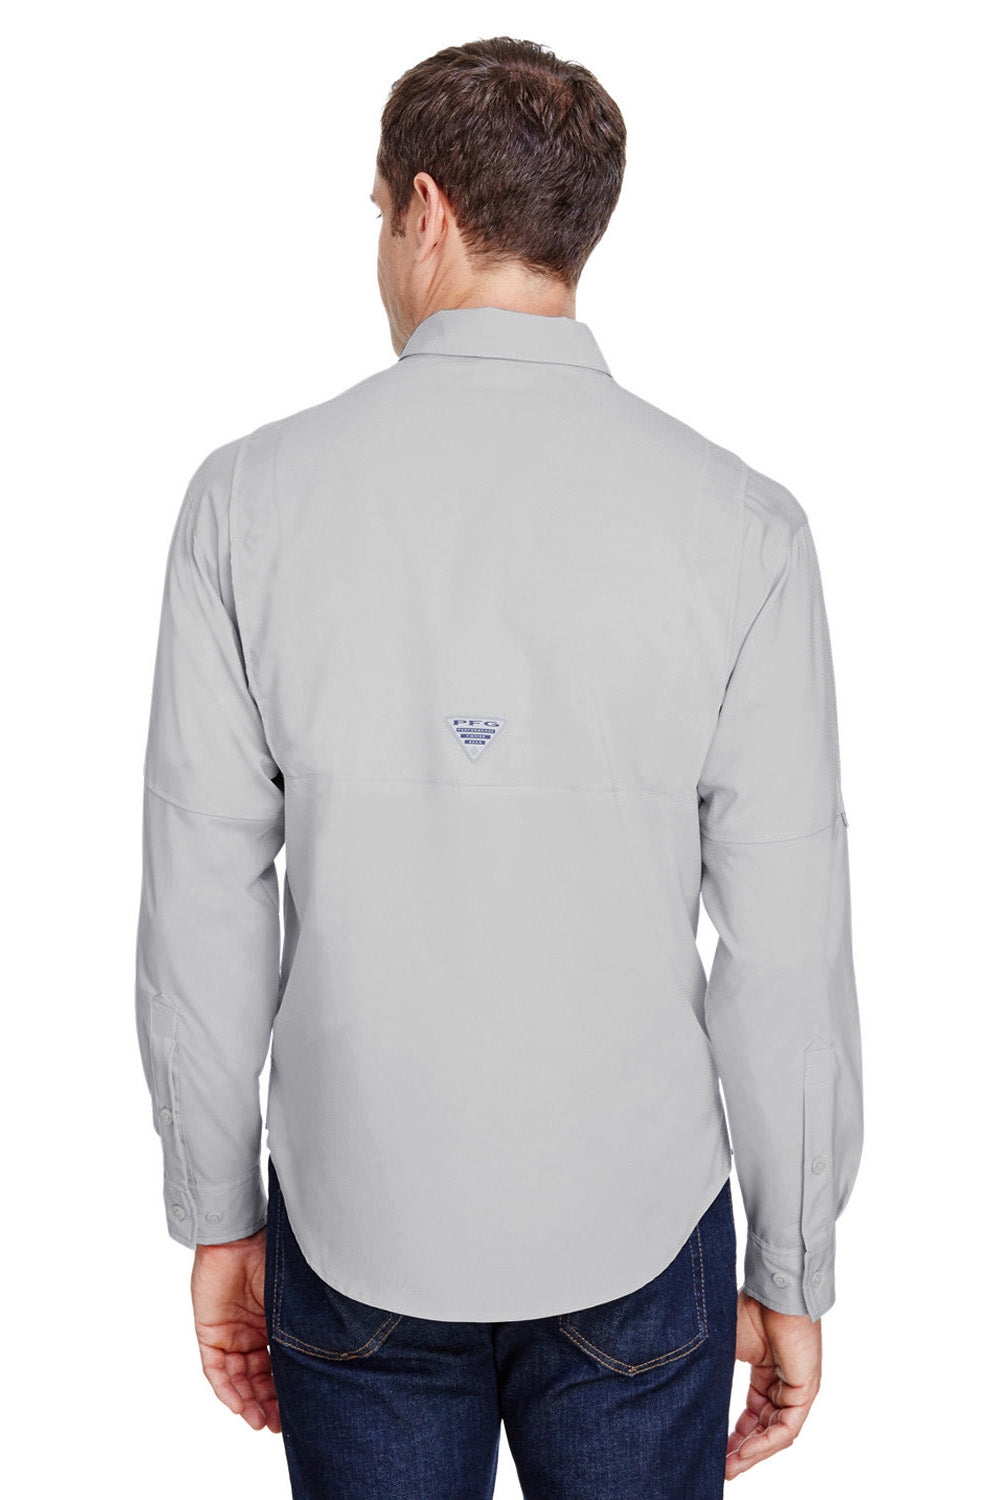 Columbia 7253 Tamiami II Moisture Wicking Long Sleeve Button Down Shirt w/ Double Pockets Cool Grey Back